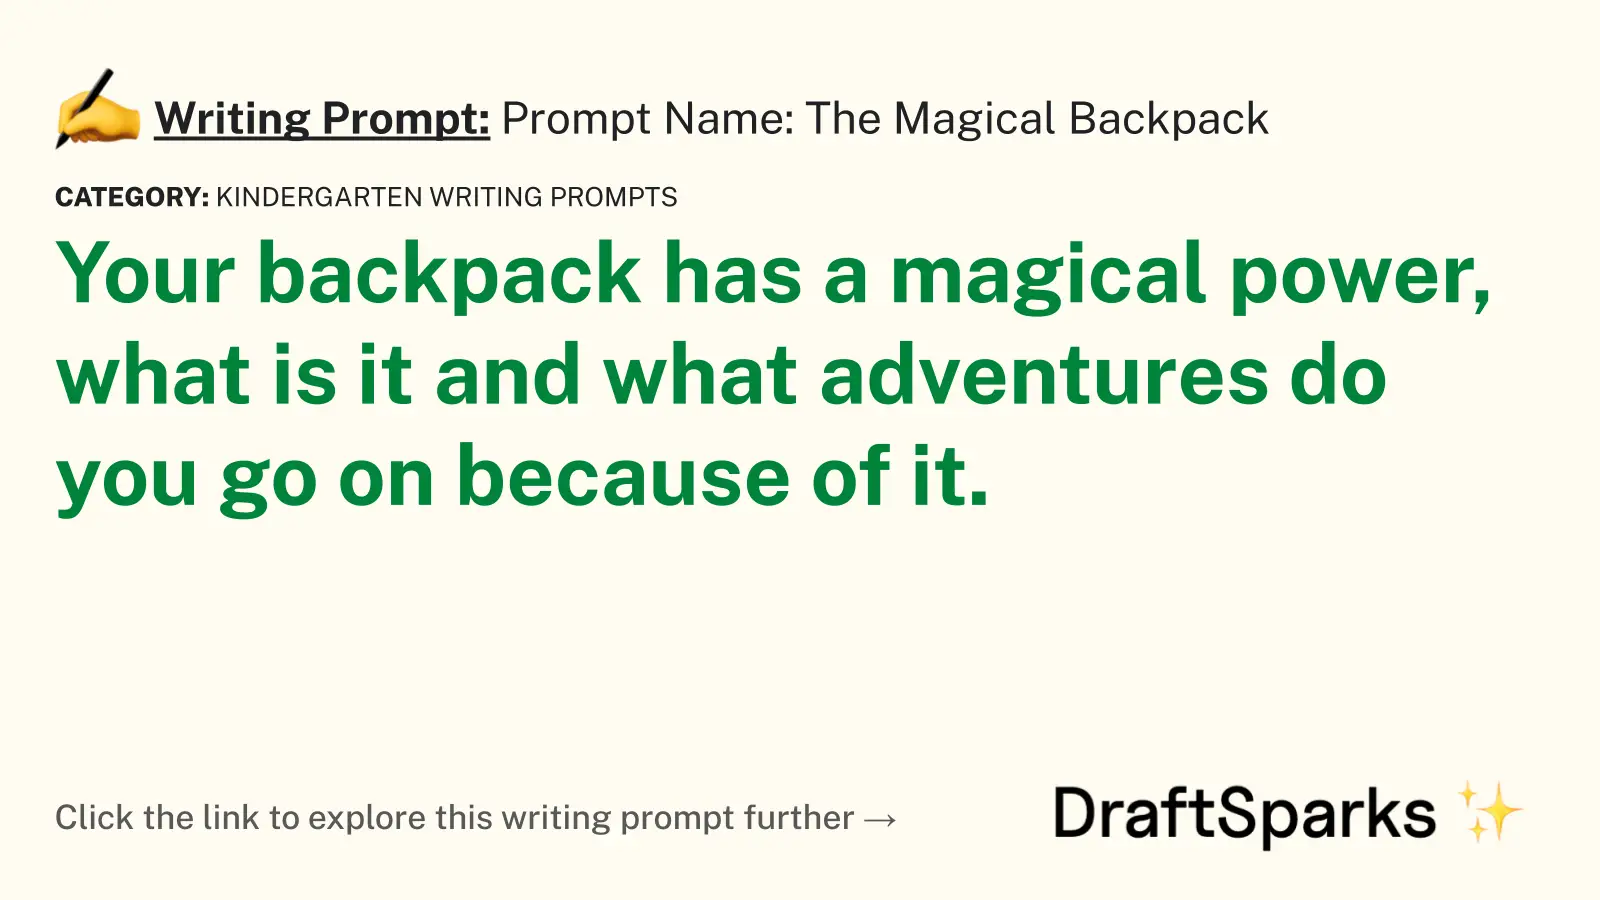 Prompt Name: The Magical Backpack